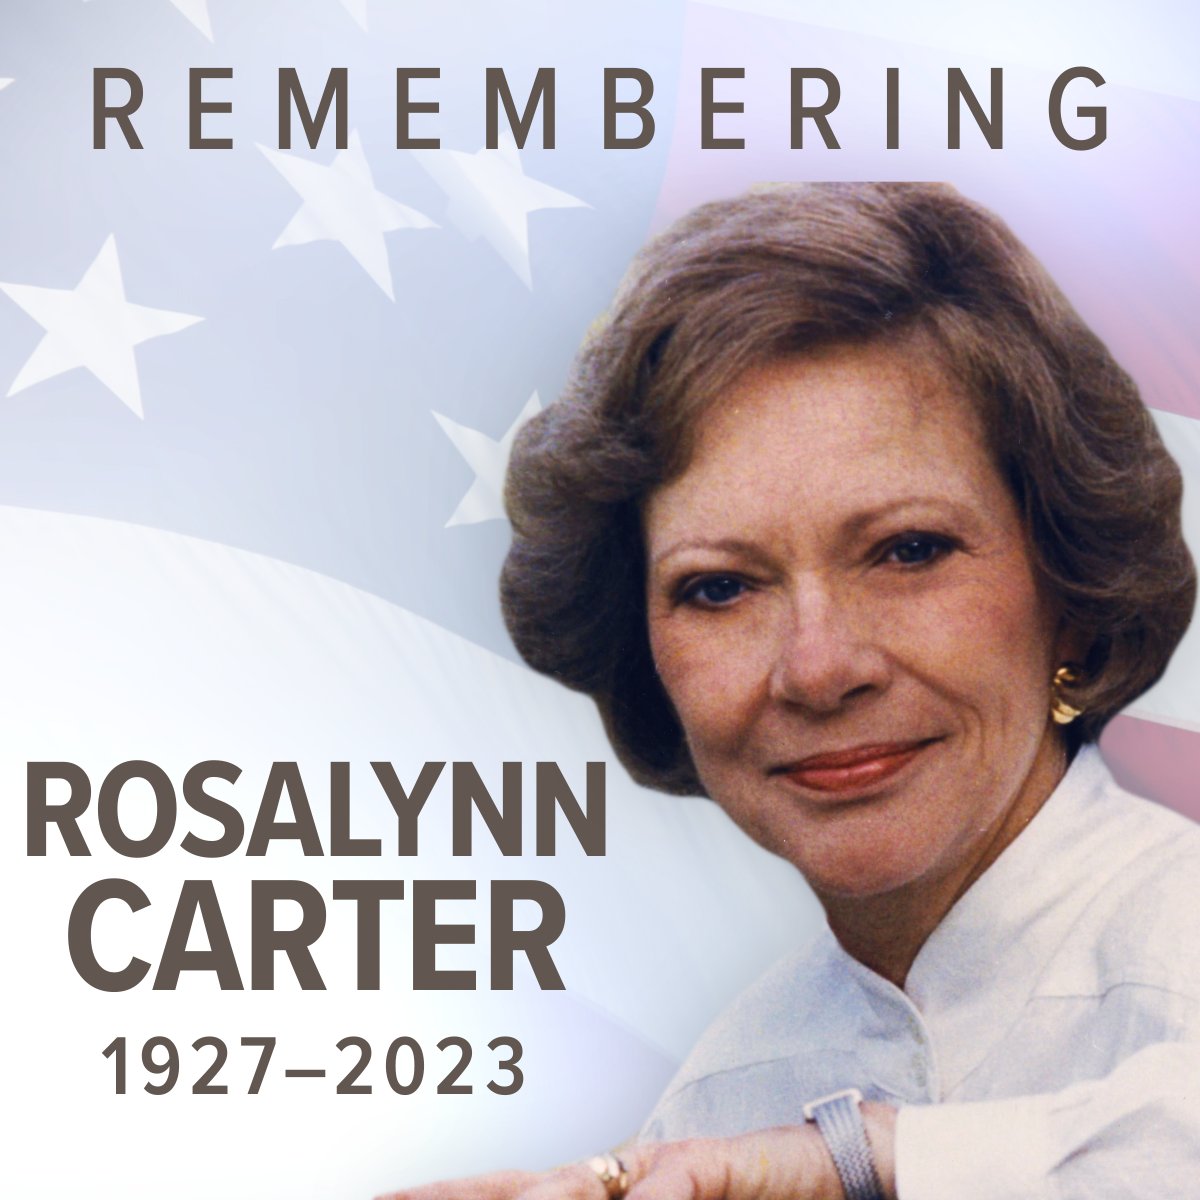 WCNC Charlotte on X: "Rosalynn Carter, former US first lady, dead at 96 |  STORY: https://t.co/GEYdEtj6lg https://t.co/zMLBcpXOoI" / X